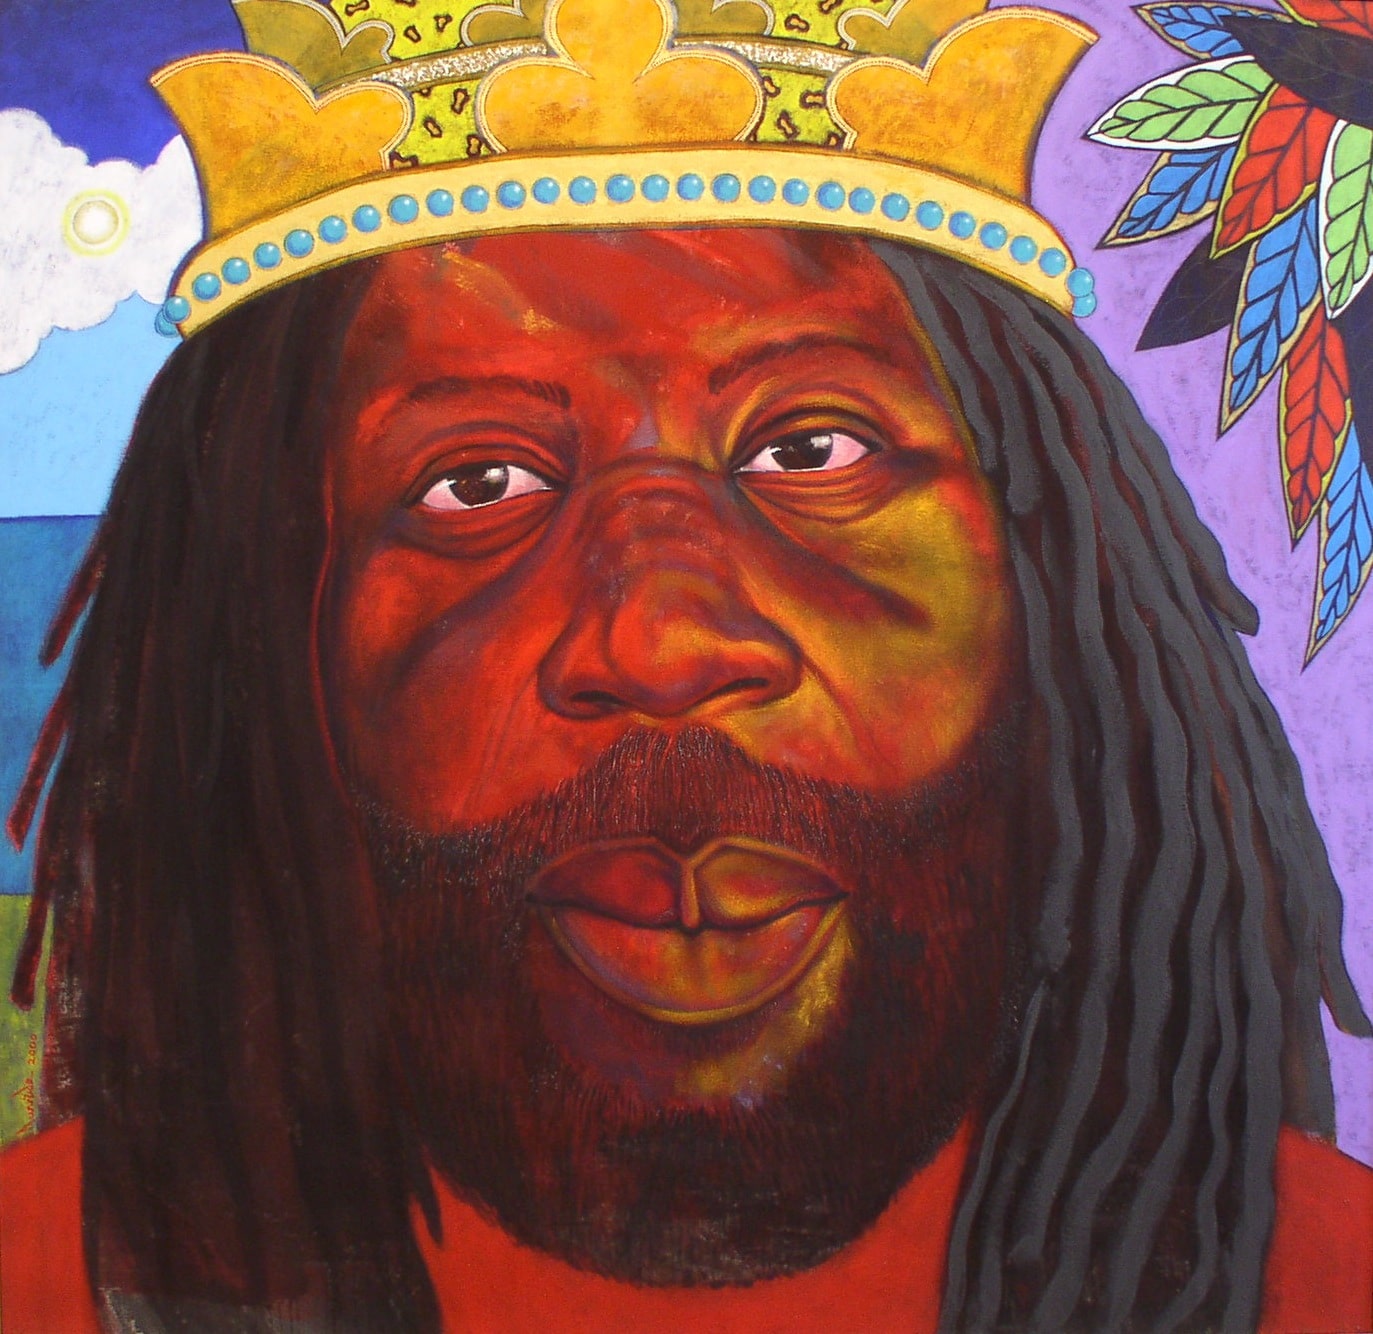 From The Collection “solomon” 2000 By Stan Burnside National Art Gallery Of The Bahamas